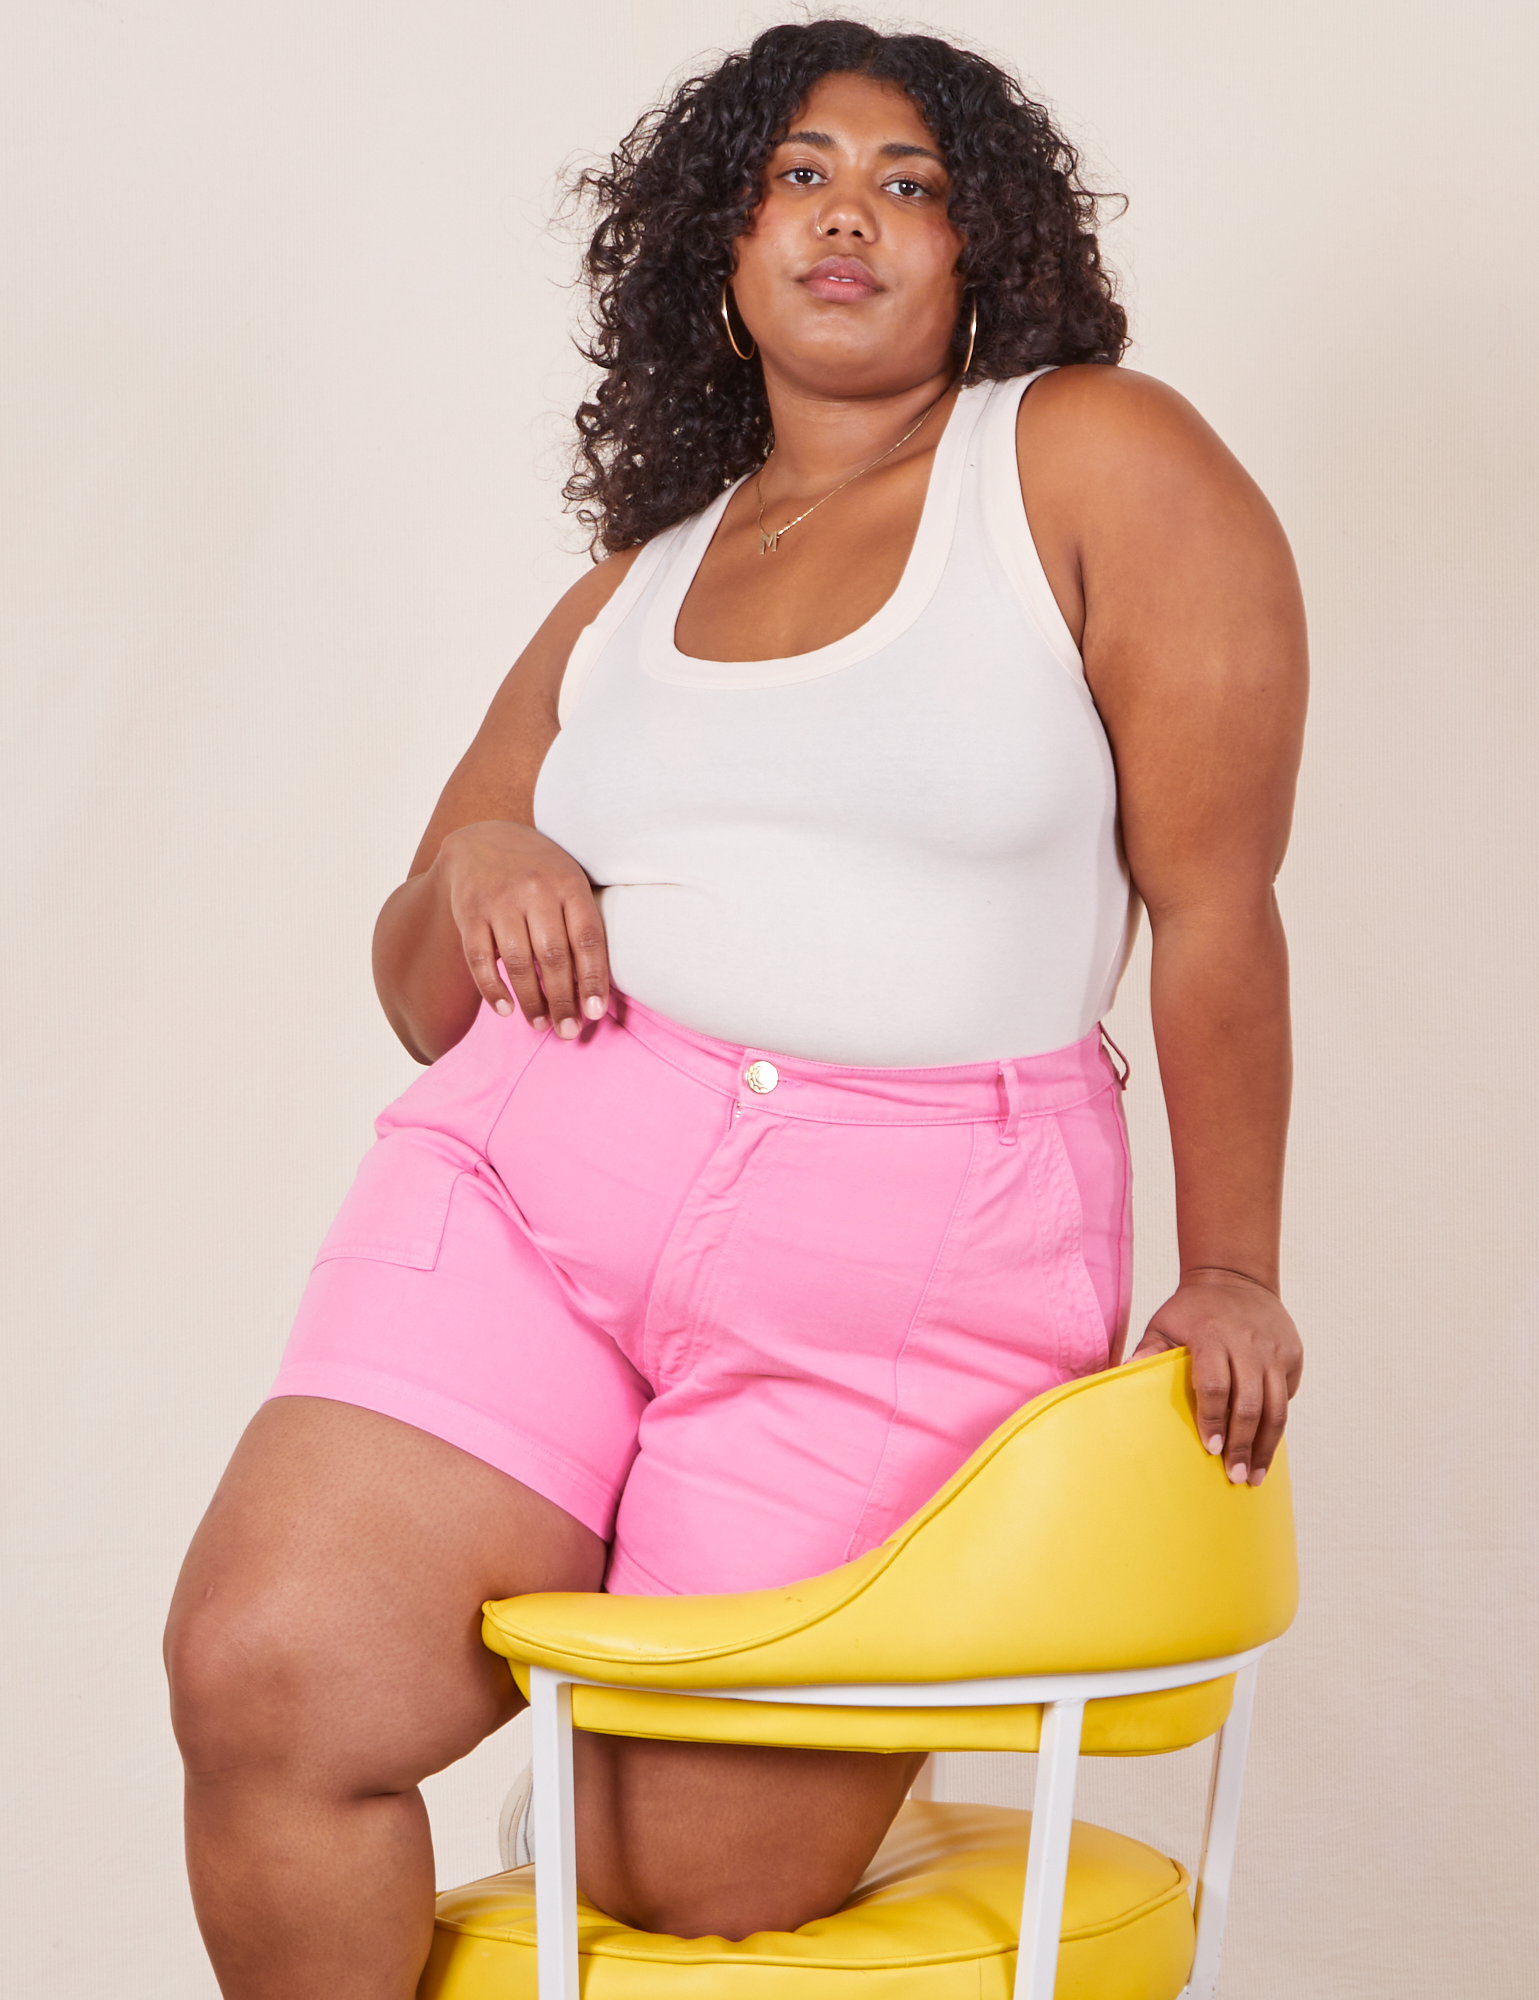 Morgan is 5’5” and wearing 1XL Classic Work Shorts in Bubblegum Pink paired with Tank Top in vintage tee off-white